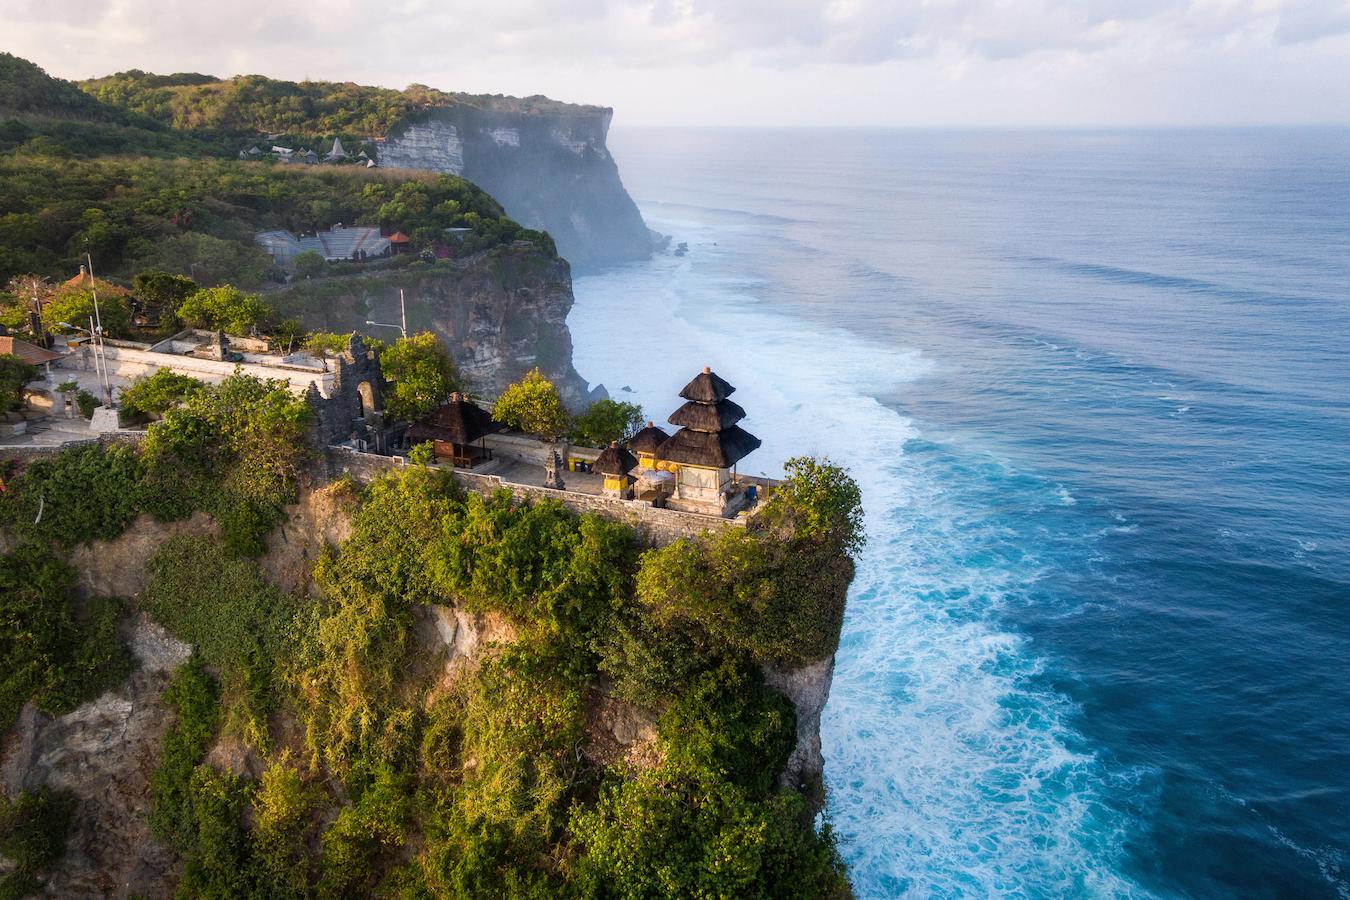 a temple on a green cliff by the ocean book accommodation early indonesian independence day indonesia's independence day kite flying full swing bali kites festival sun seekers rice terraces beautiful island good weather